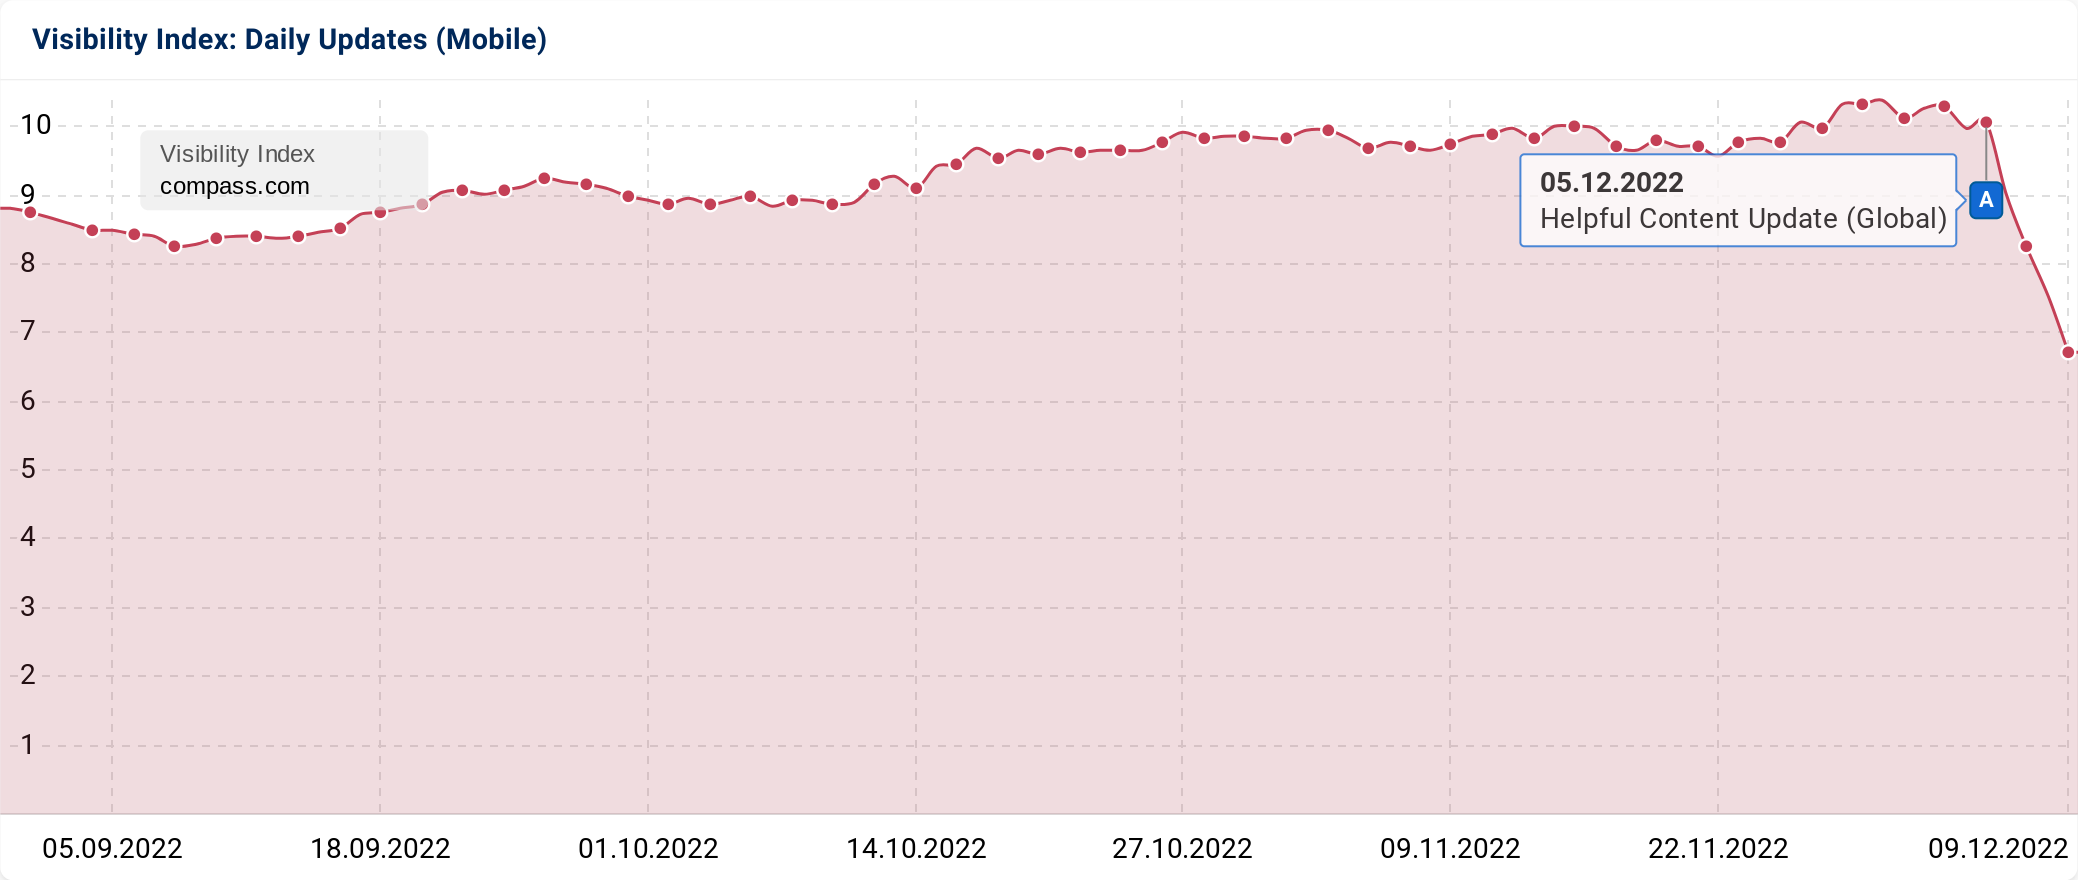 Visibility Index graph for a domain that was potentially affected by the December Helpful Content Update.